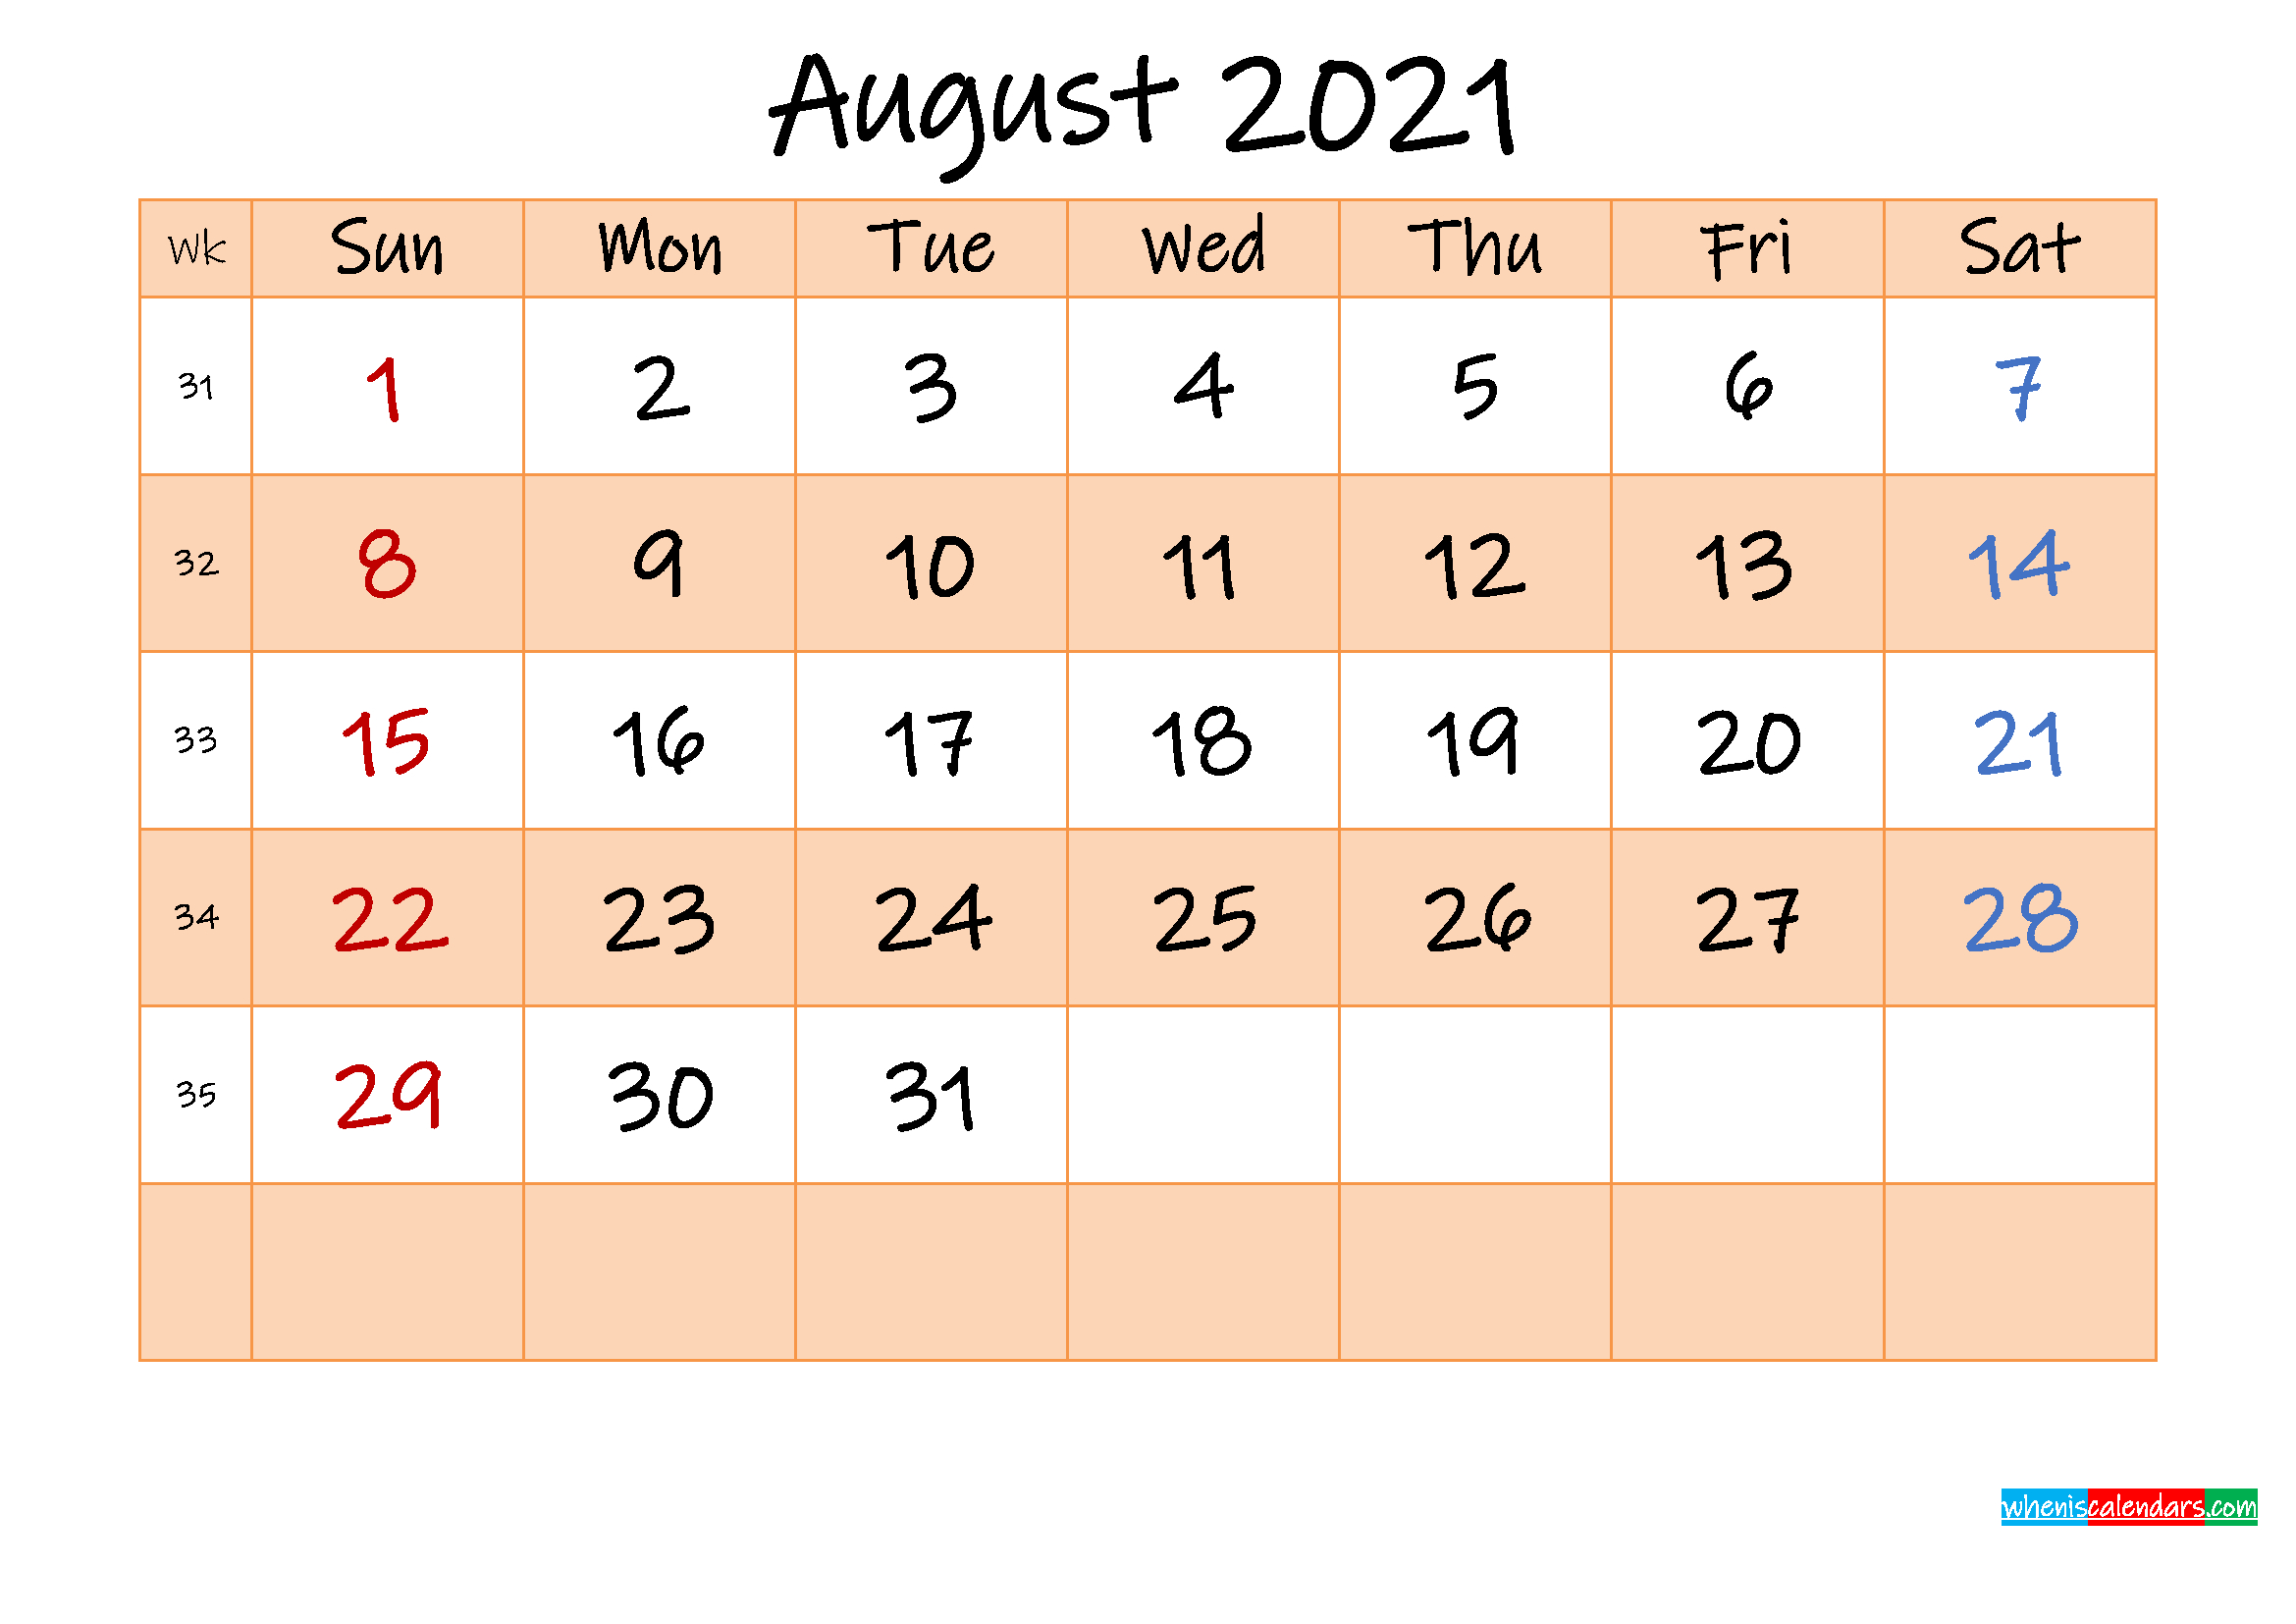 Editable August 2021 Calendar - Template No.ink21M488-Printable Calendar 2021 Monthly That Can Be Edited